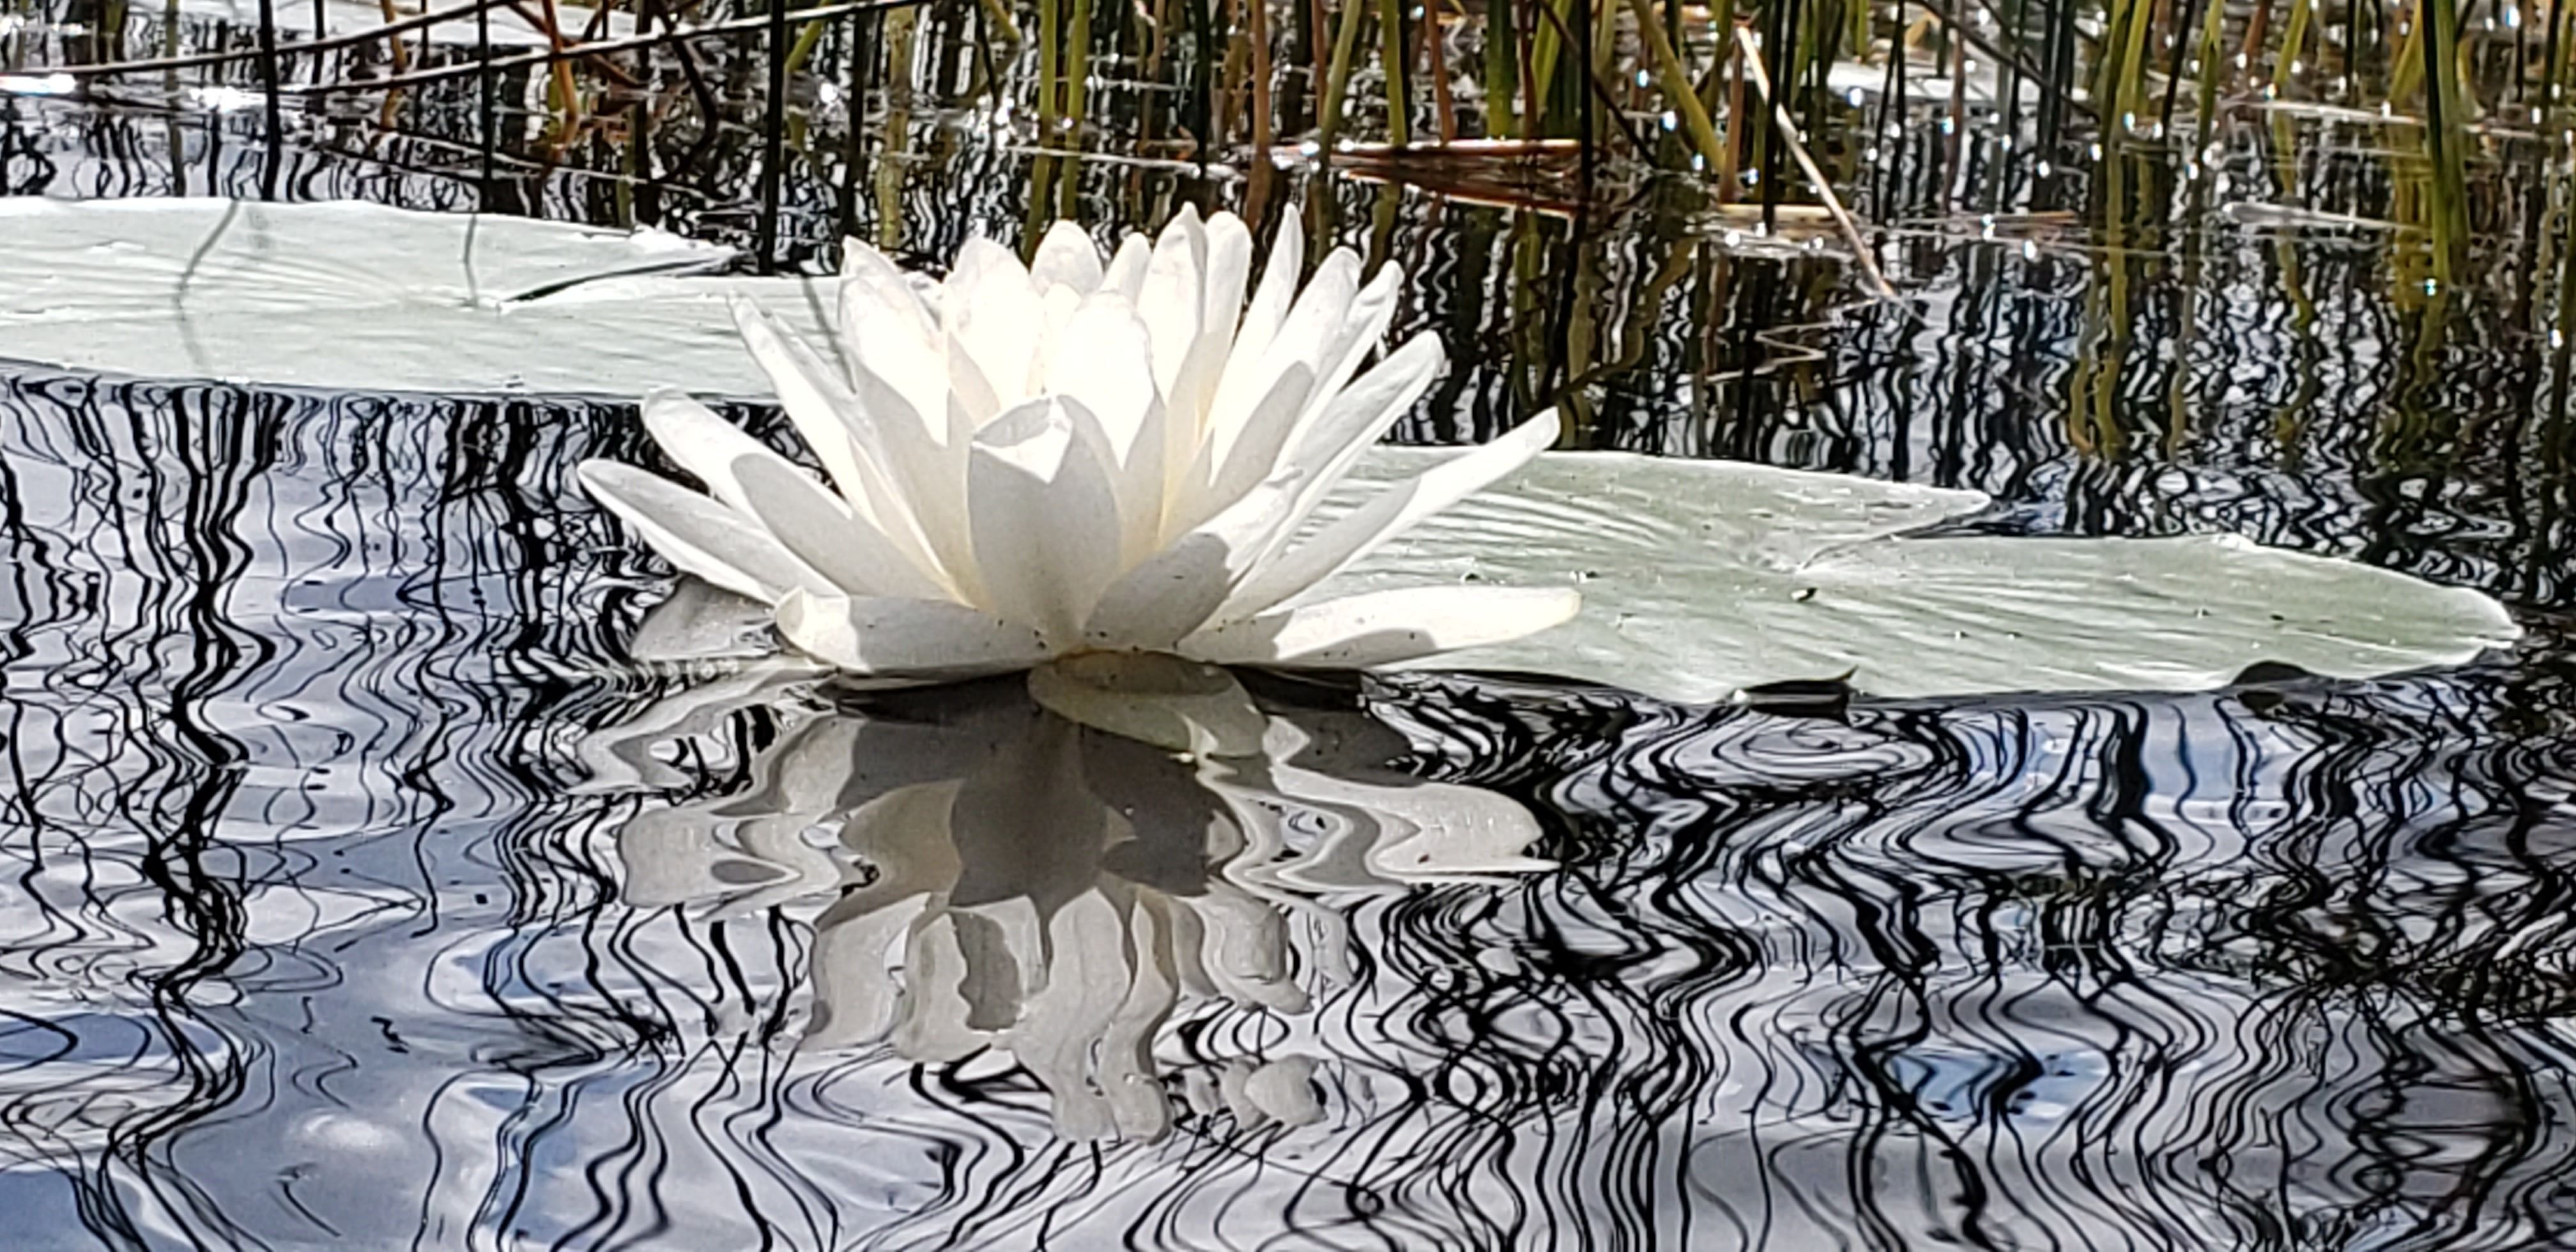 A white water lily is floating on a calm lake surface with lily pads behind it. The lilly is reflected on the surface of the water